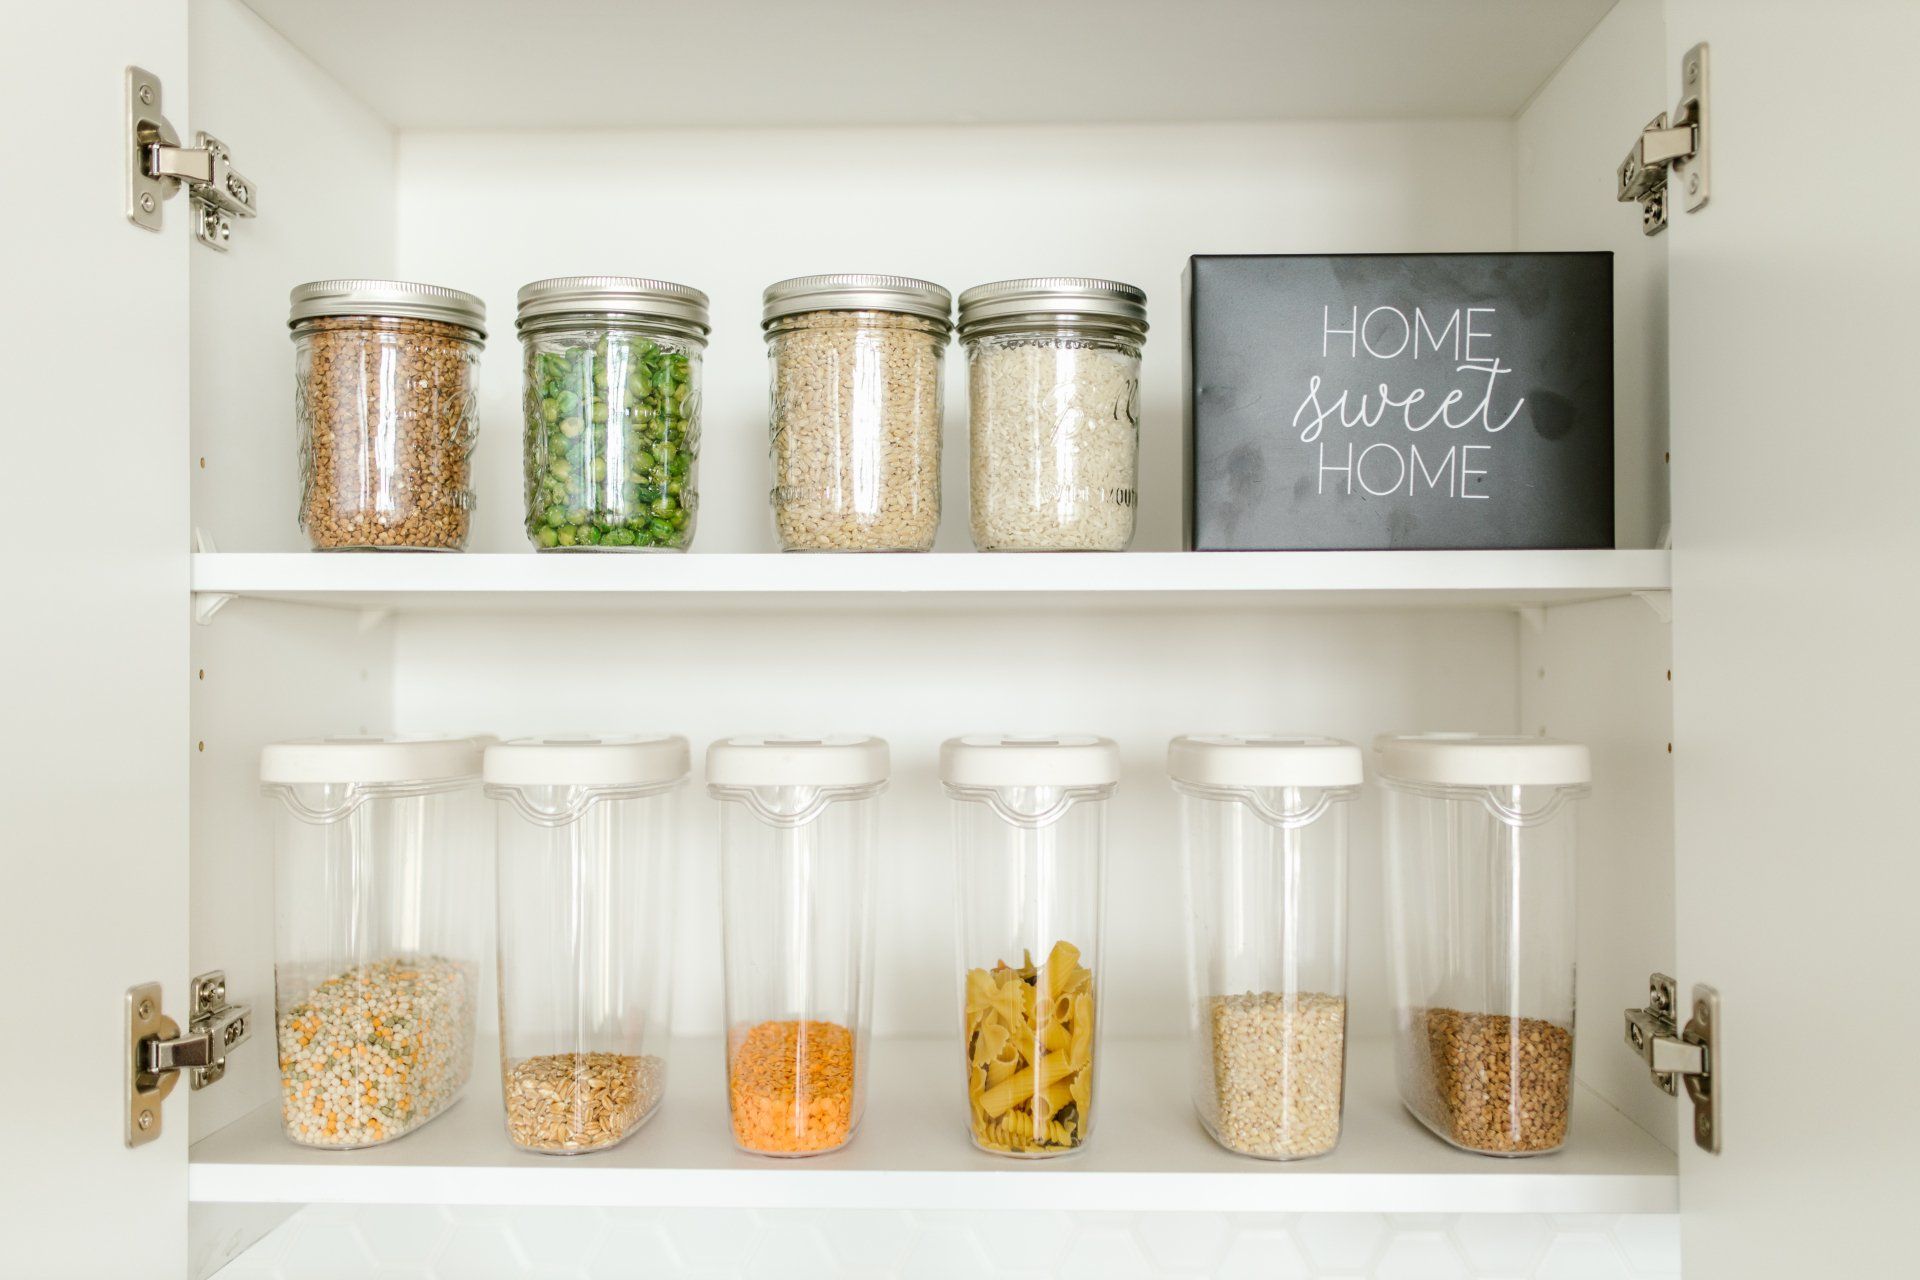 Kitchen organized, pantry decluttered, minimalistic